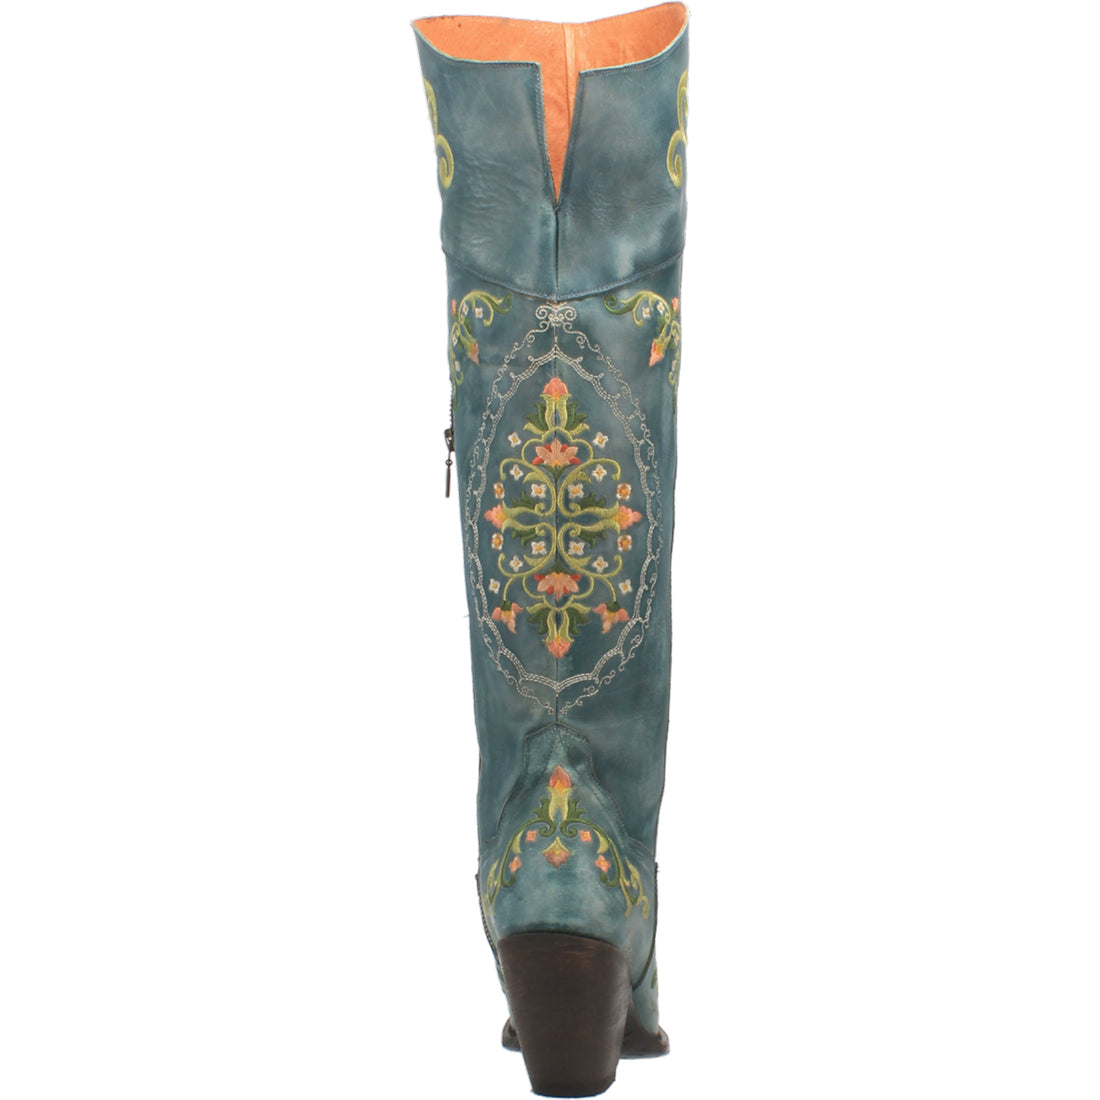 FLOWER CHILD LEATHER BOOT Preview #4